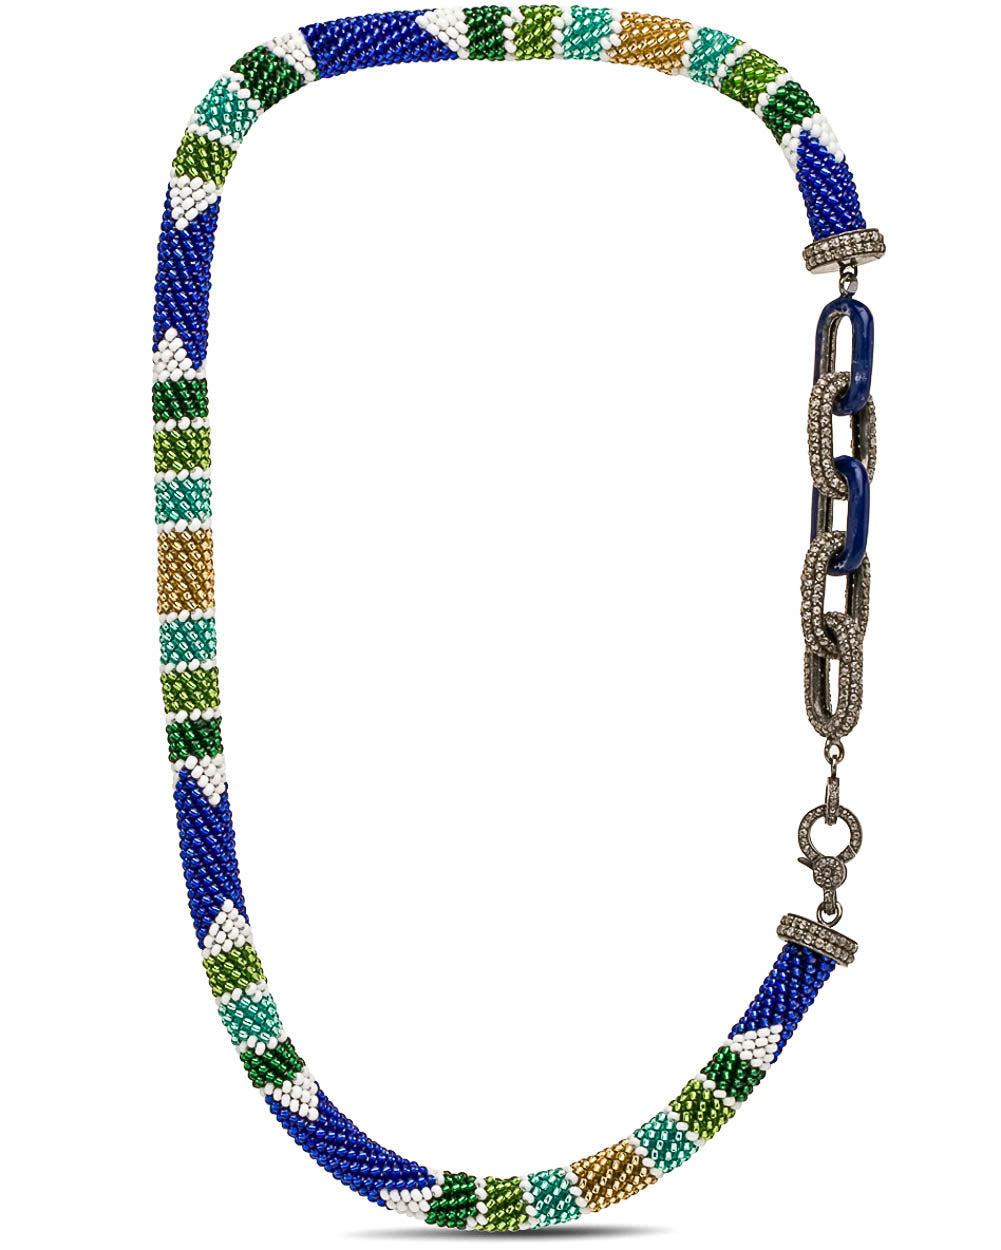 Blue and Green Enamel Bead Diamond Link Necklace